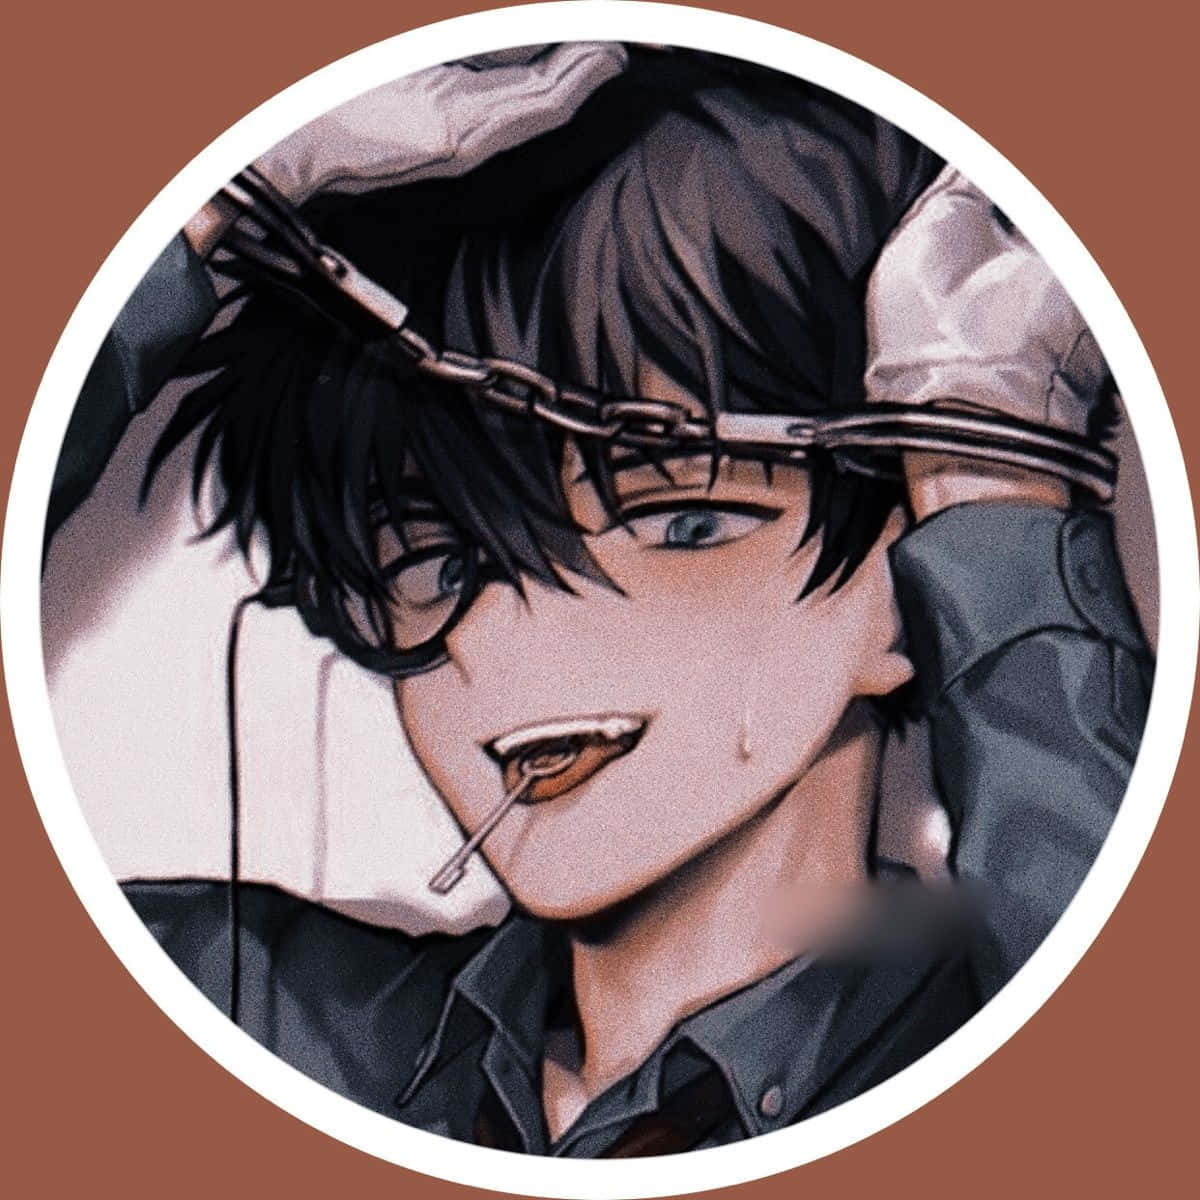 100+] Aesthetic Anime Profile Pictures